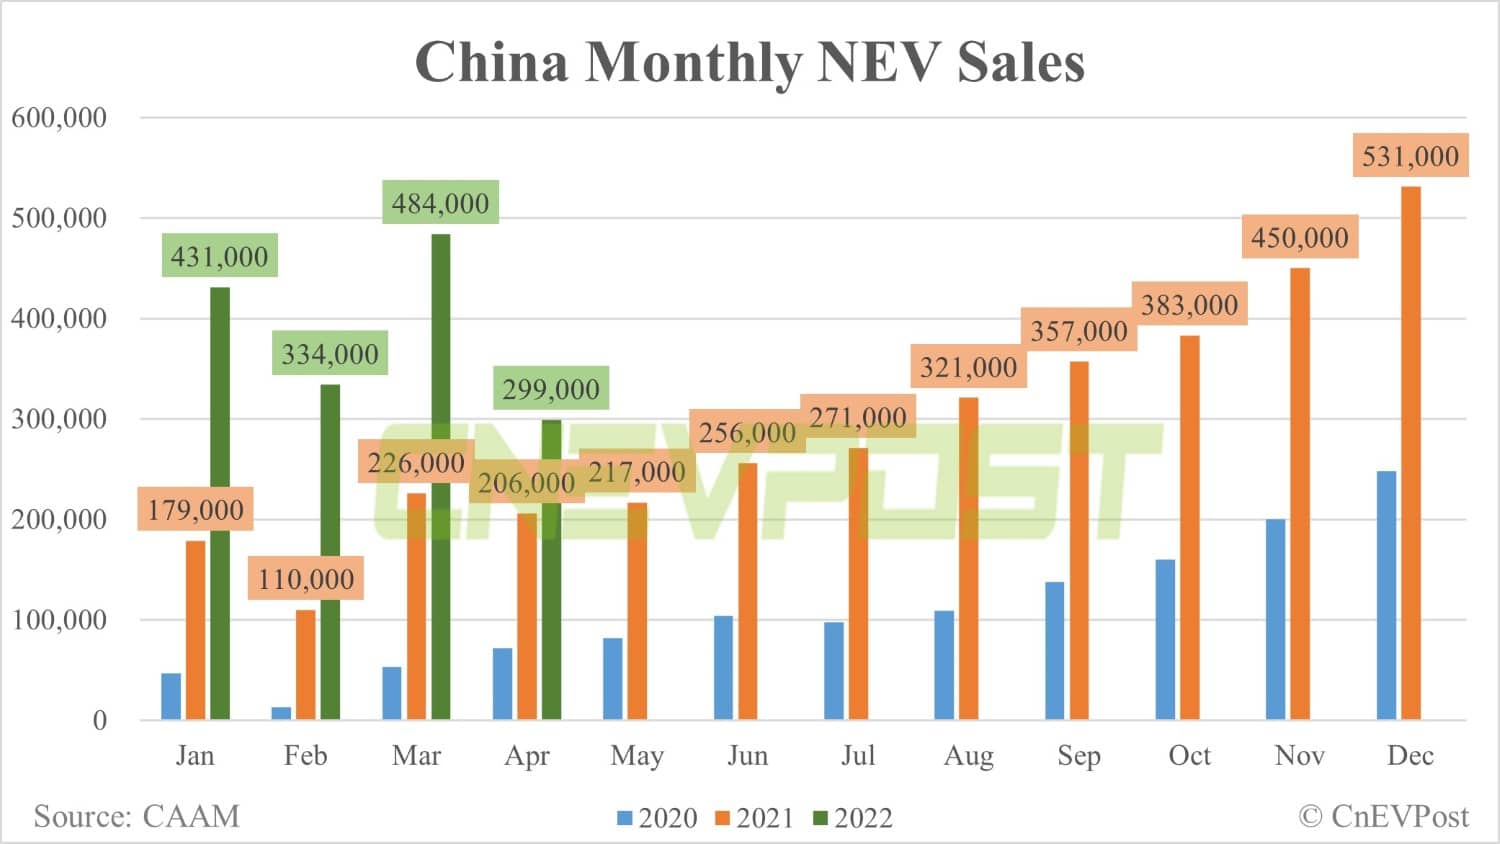 China's April NEV sales at 299,000 units, down 38% from March, CAAM data show-CnEVPost